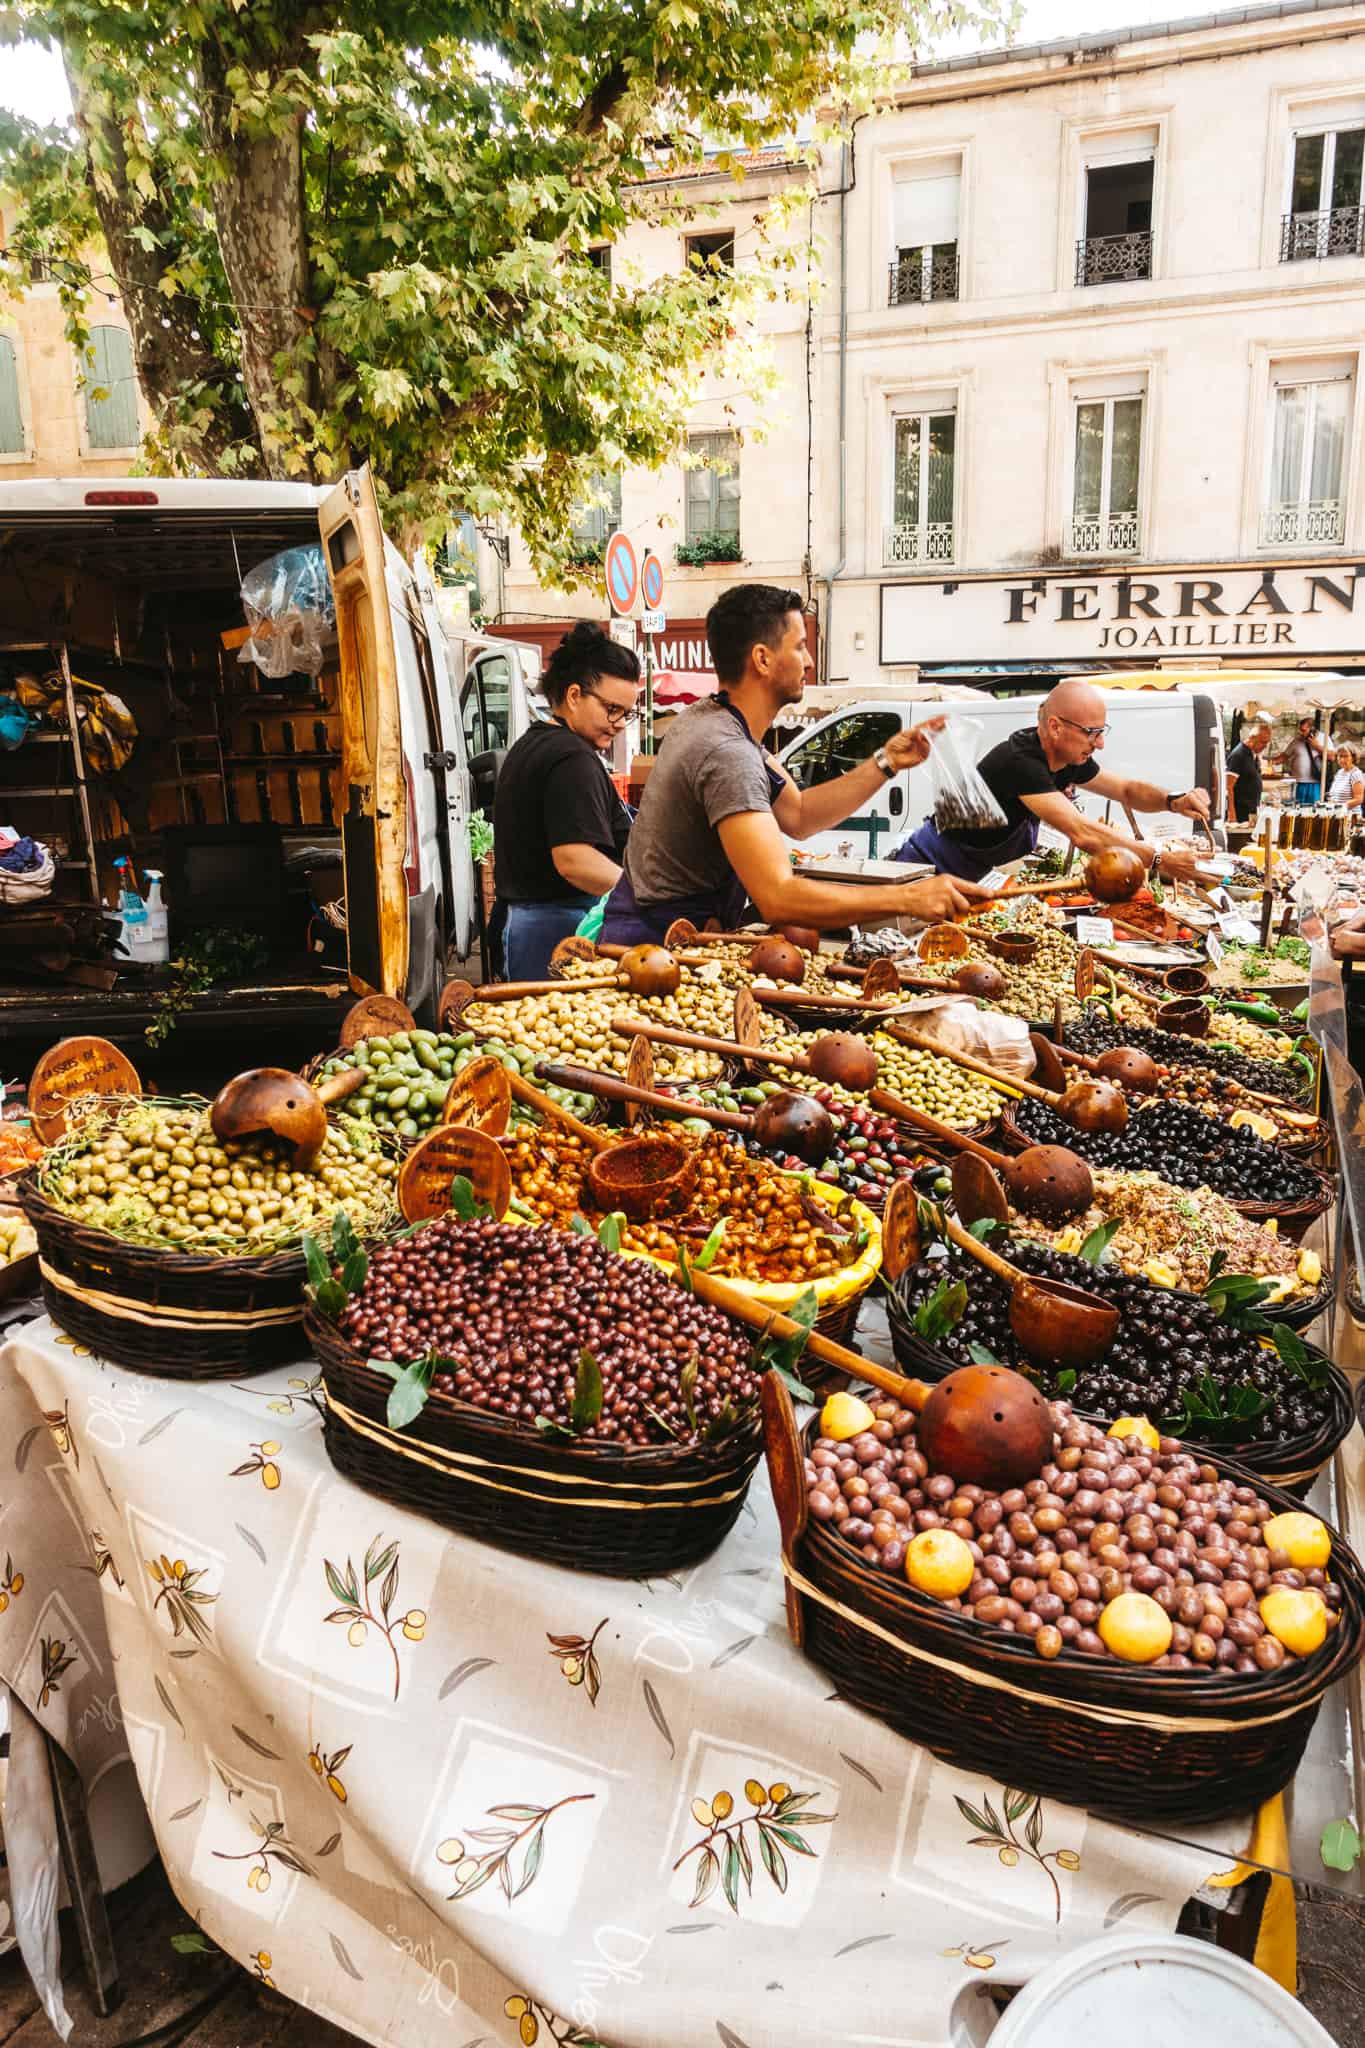 Olives at the market in Saint Remy de Provence